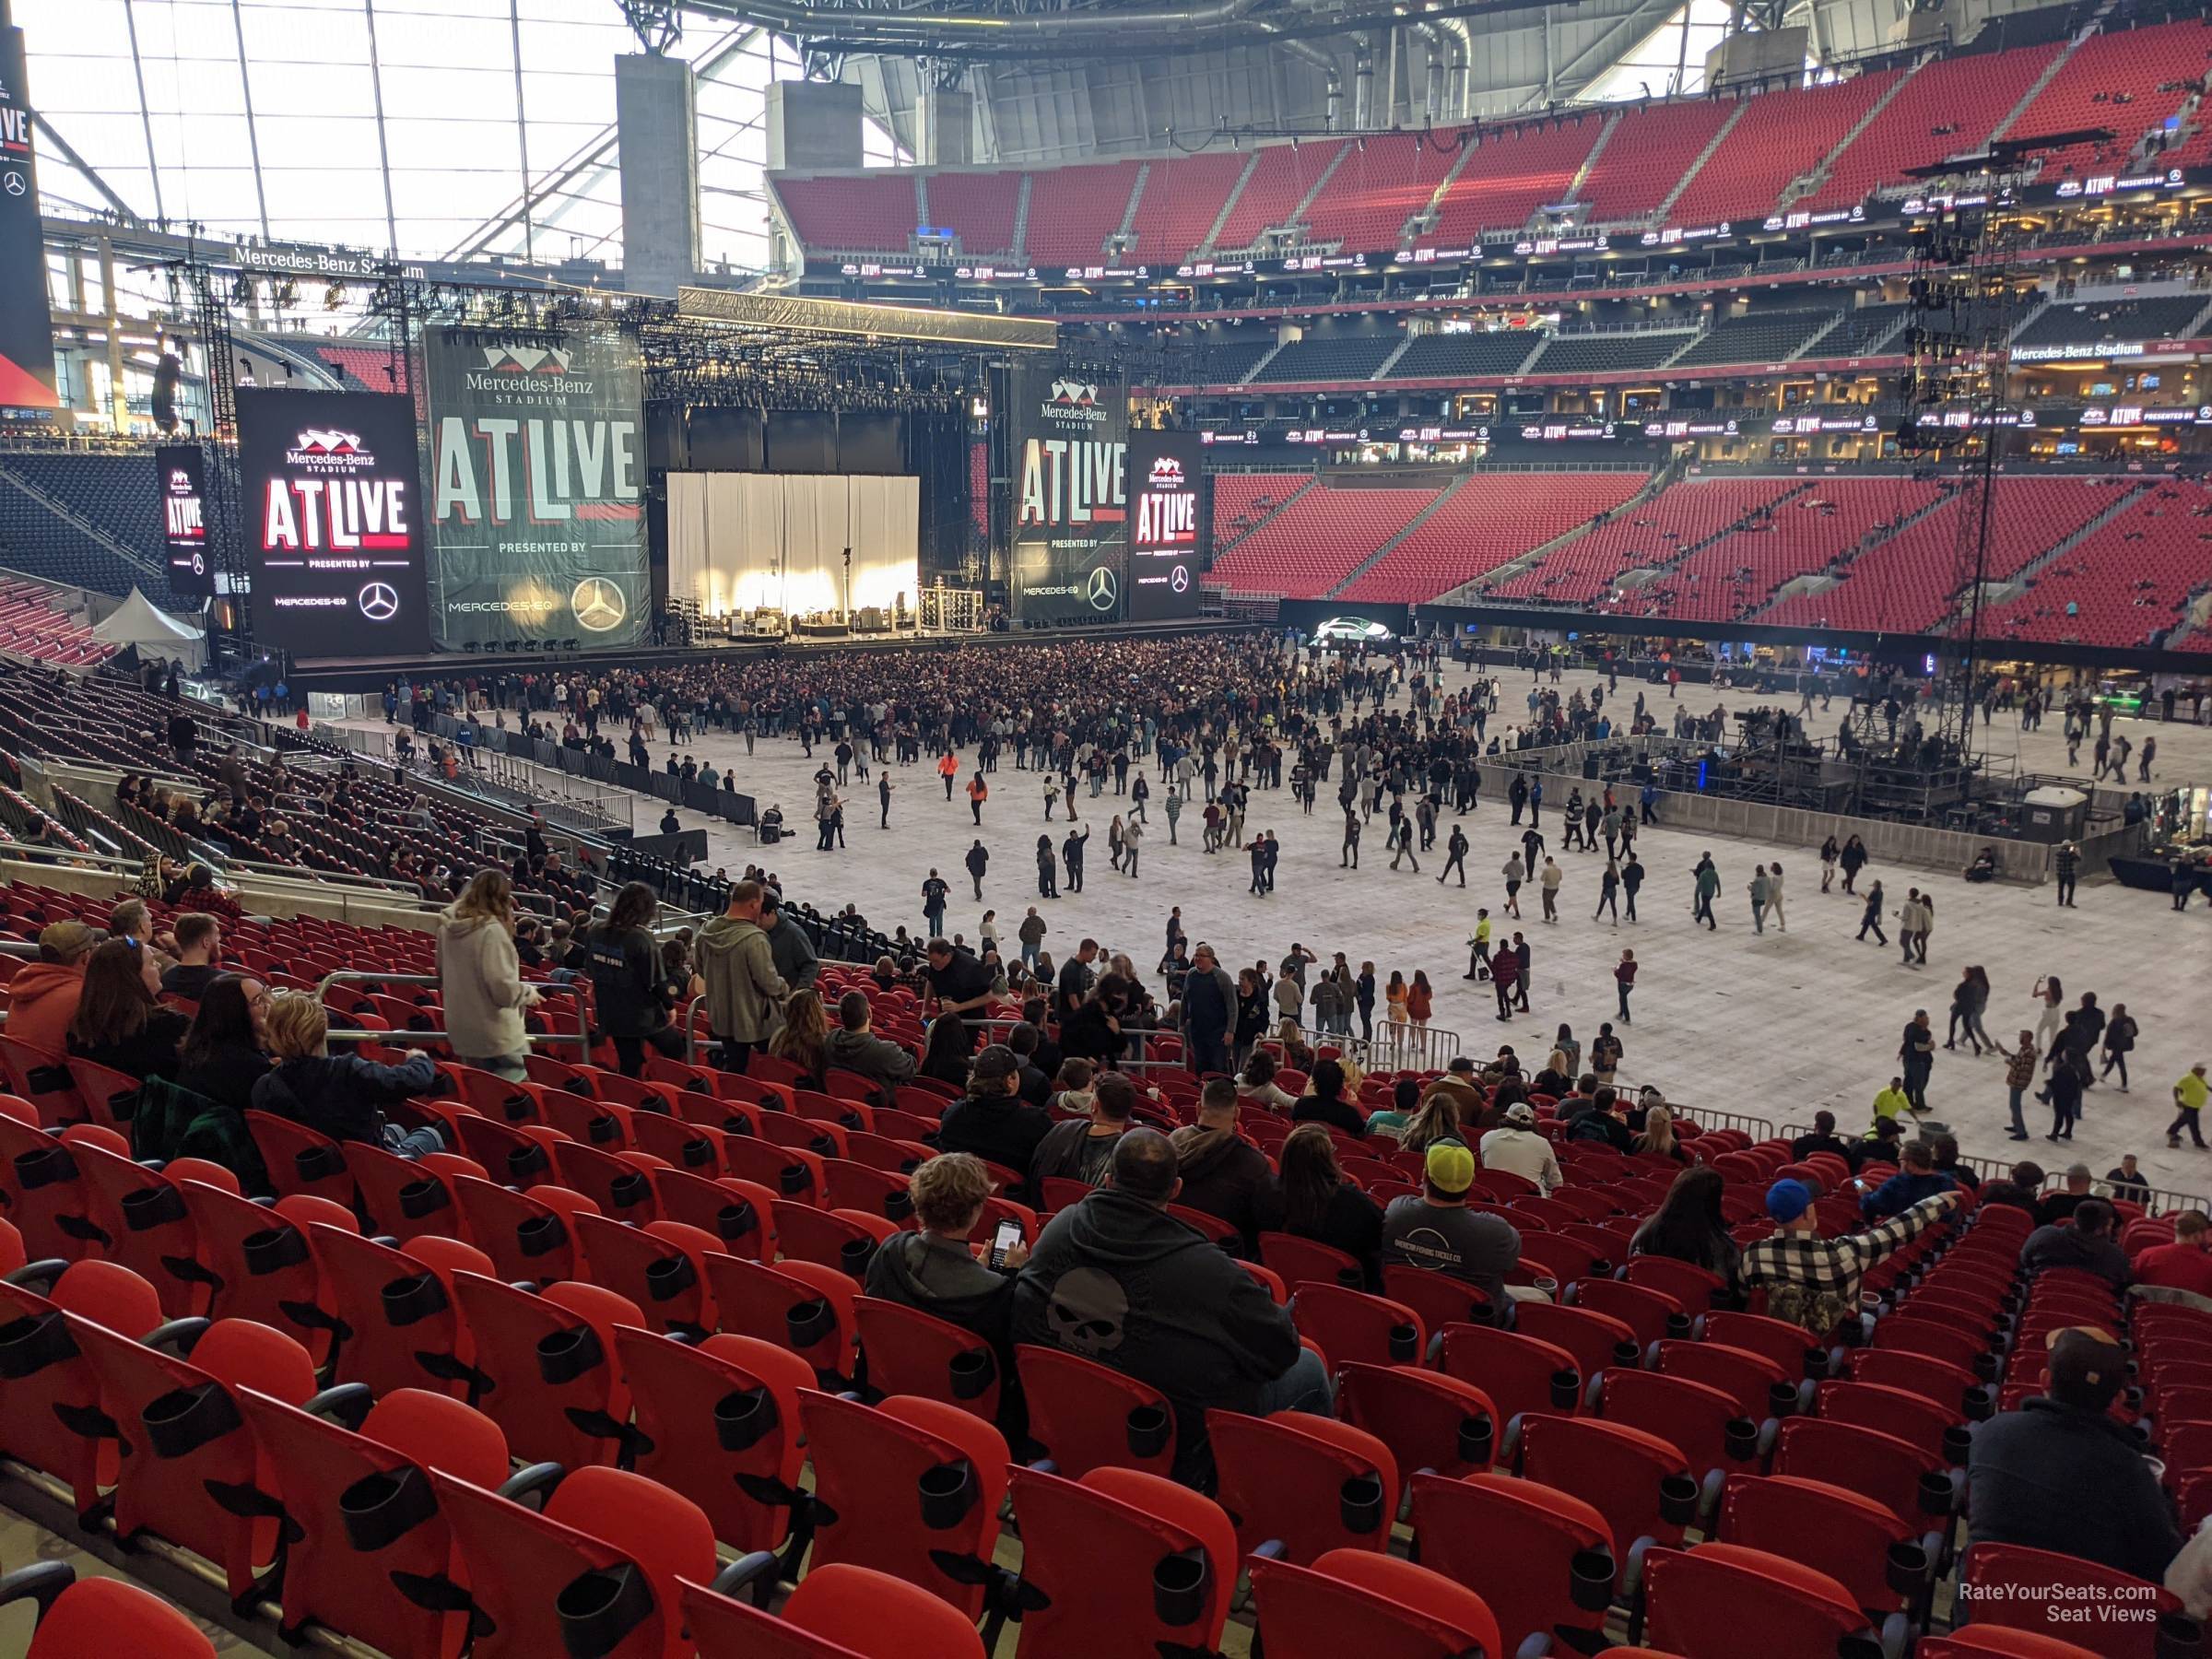 section 124, row 26 seat view  for concert - mercedes-benz stadium